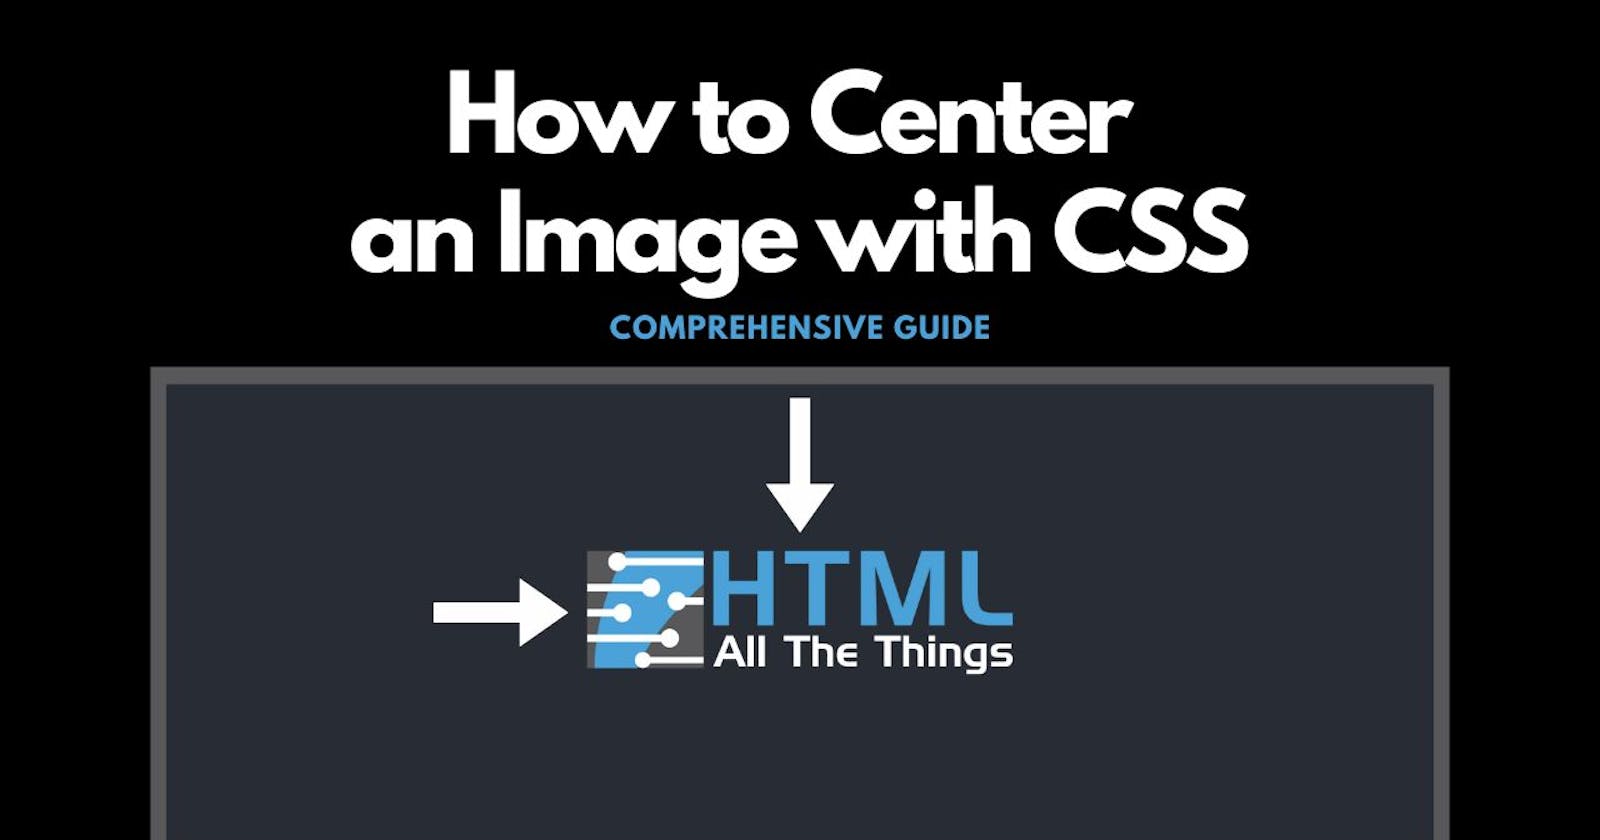 How to Center an Image with CSS